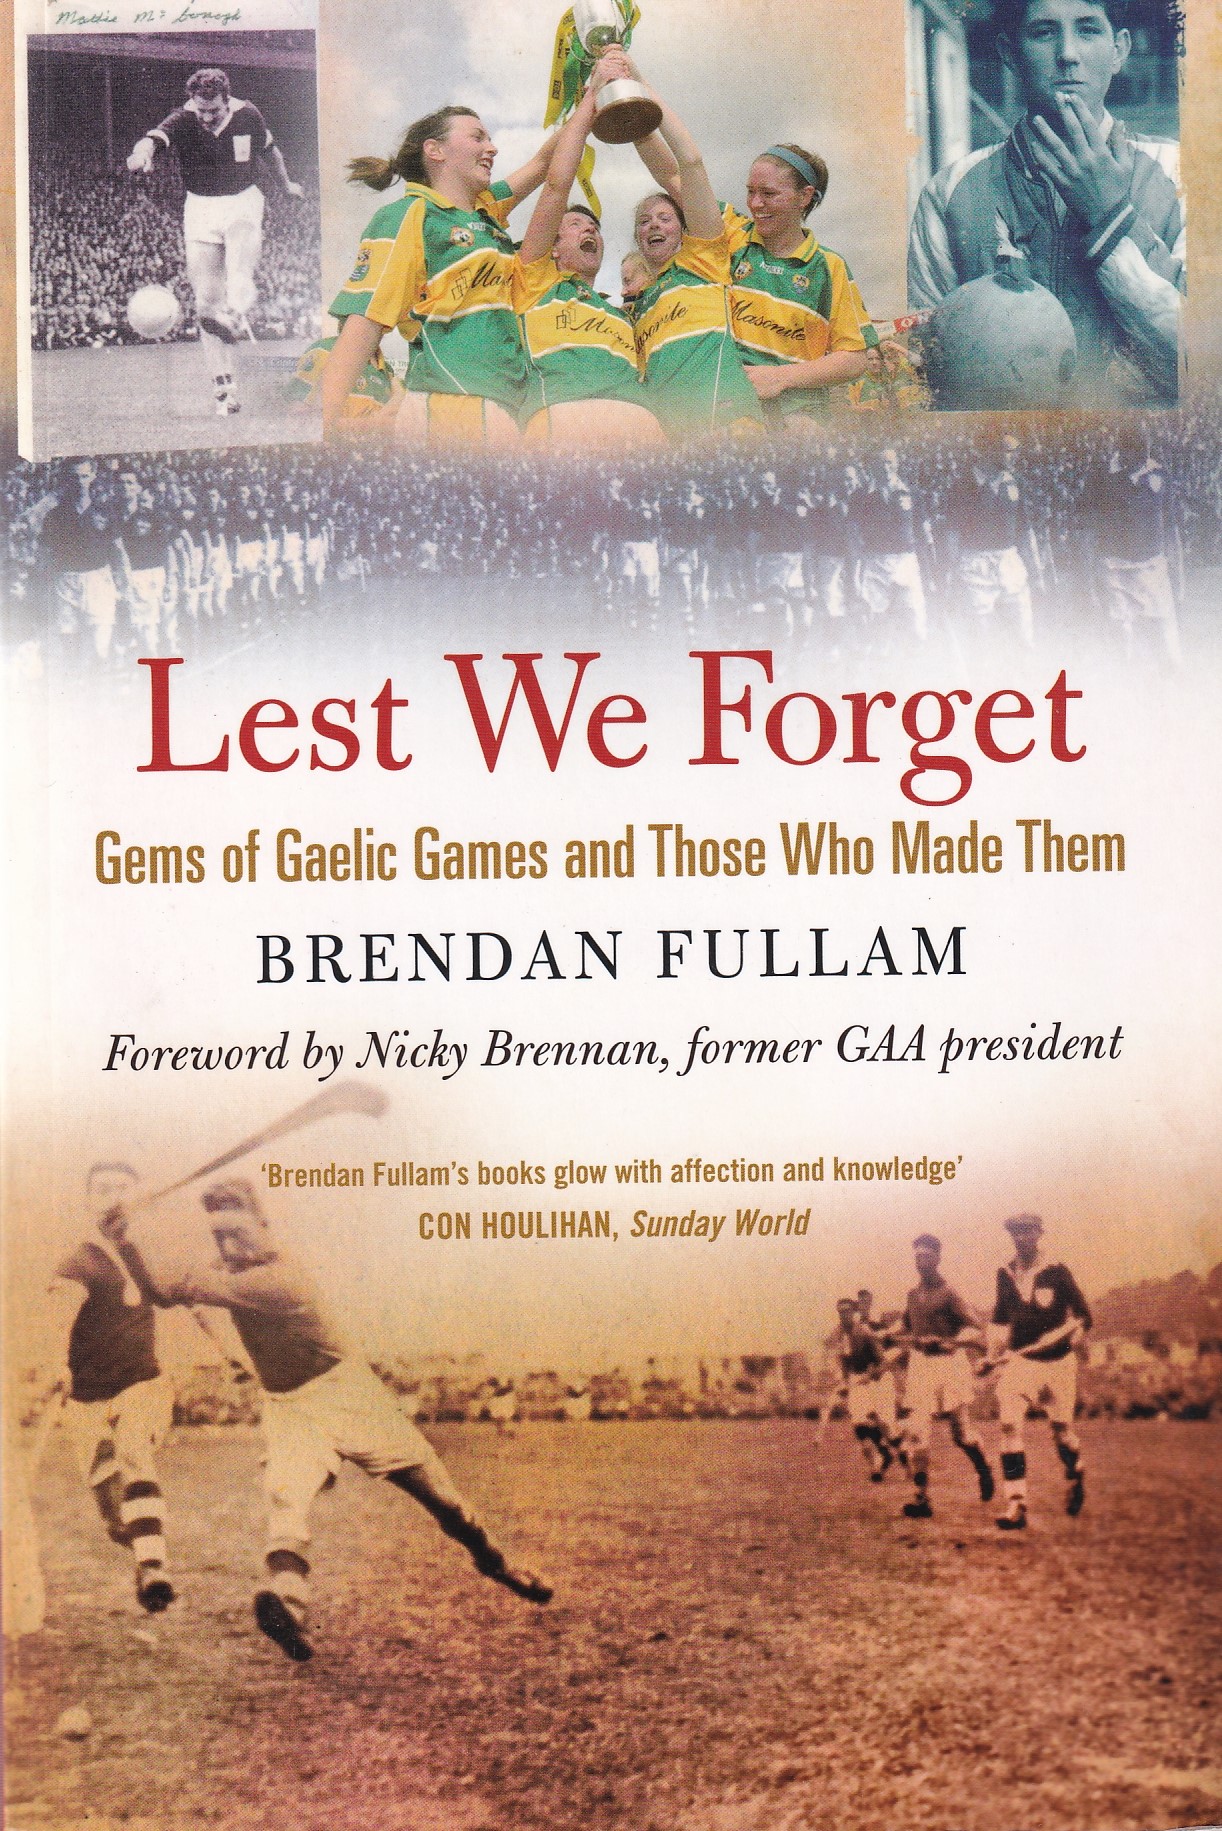 Lest We Forget: Gems of Gaelic Games and Those Who Made Them | Brendan Fullam | Charlie Byrne's